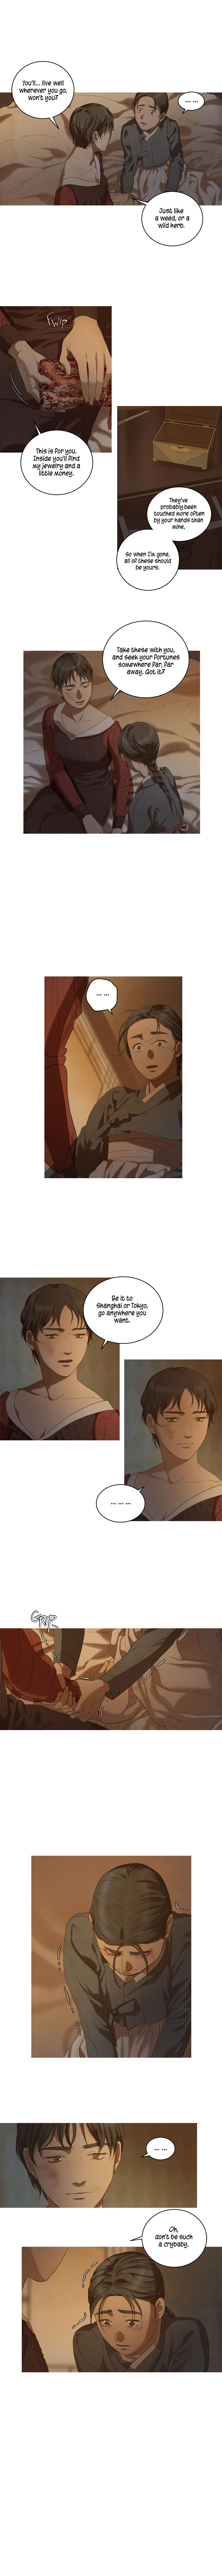 Gorae Byul - The Gyeongseong Mermaid - Chapter 13 Page 9